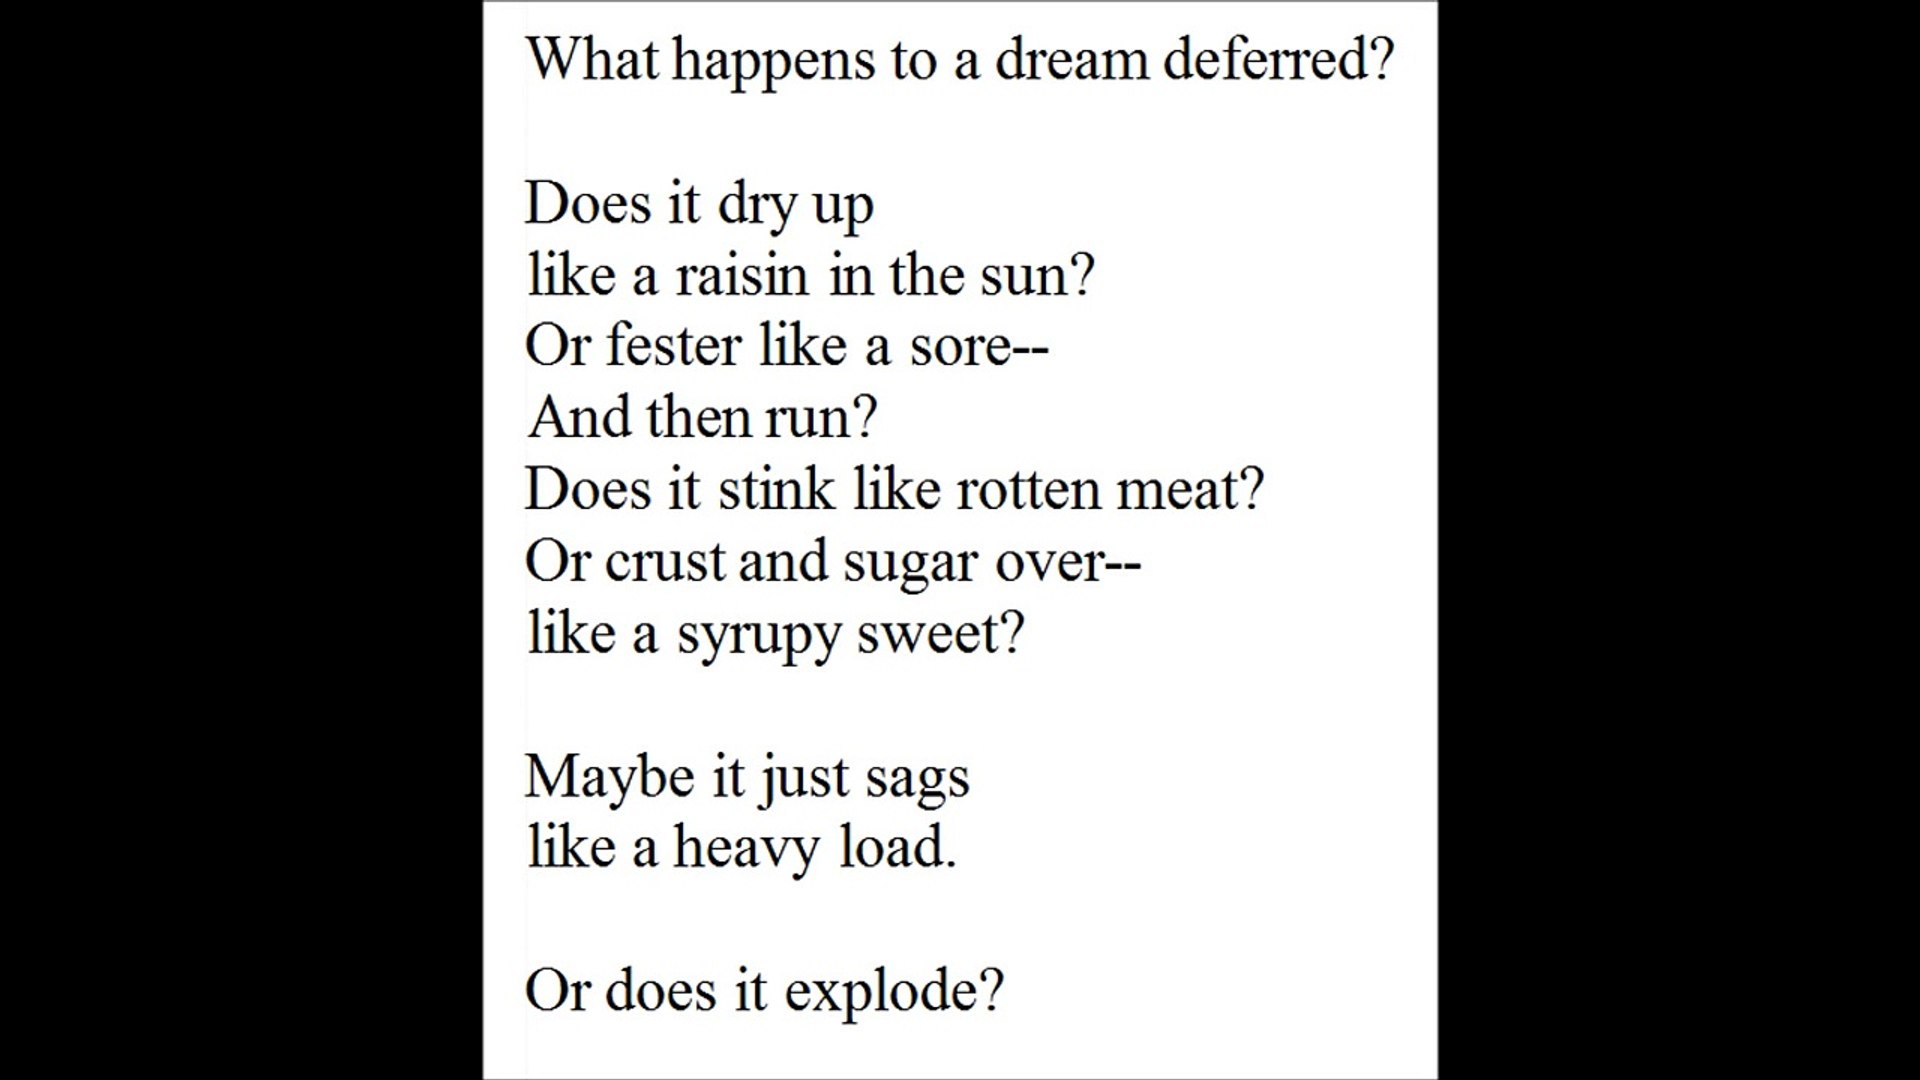 what is a dream deferred